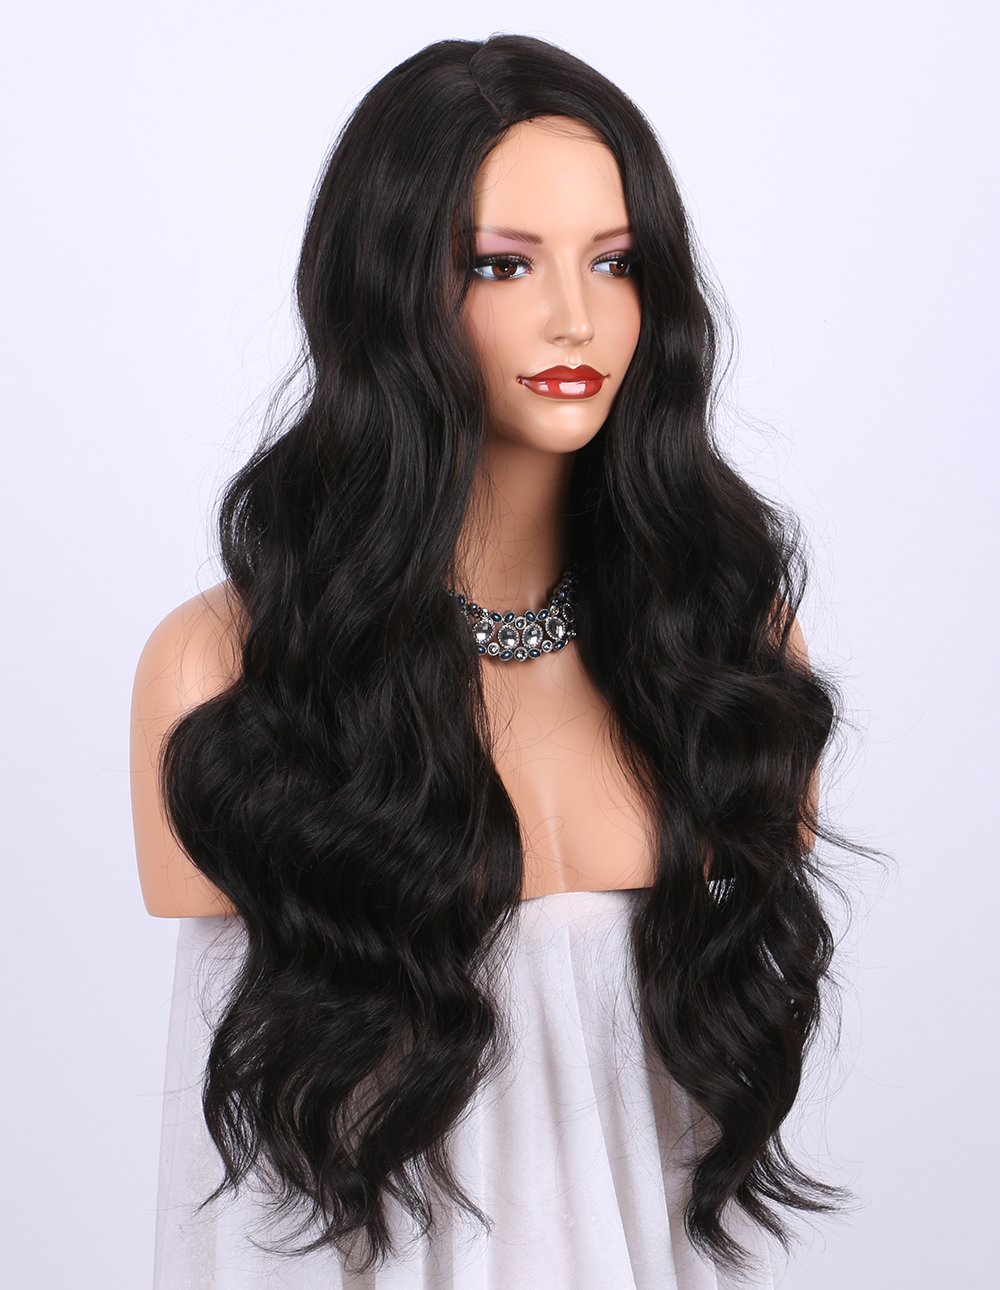 Price:$19.99     K'ryssma Dark Brown Synthetic Wigs for women - Natural Looking Long Wavy Right Side Parting NONE Lace Heat Resistant Replacement Wig Full Machine Made 24 inches (#2)   Beauty